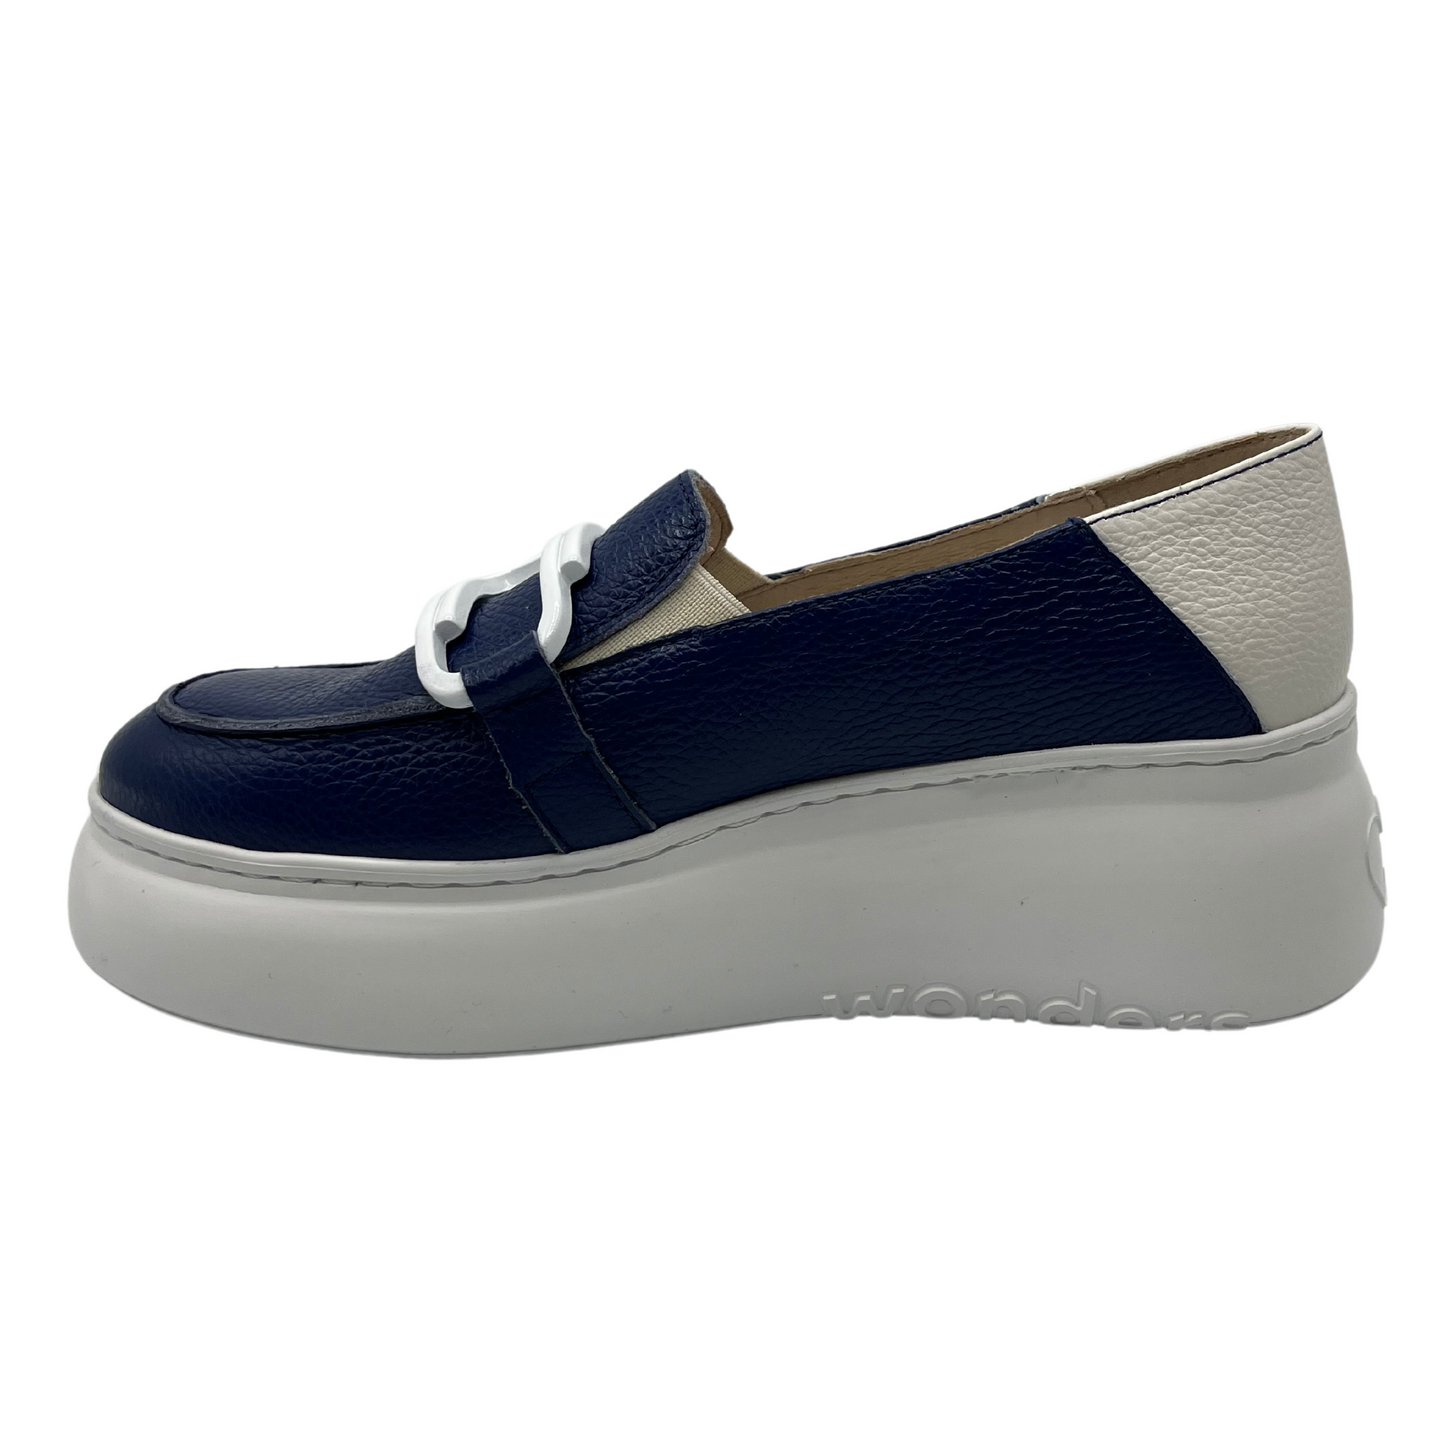 Left facing view of navy and white leather loafer with white rubber platform sole and large white paperclip detail